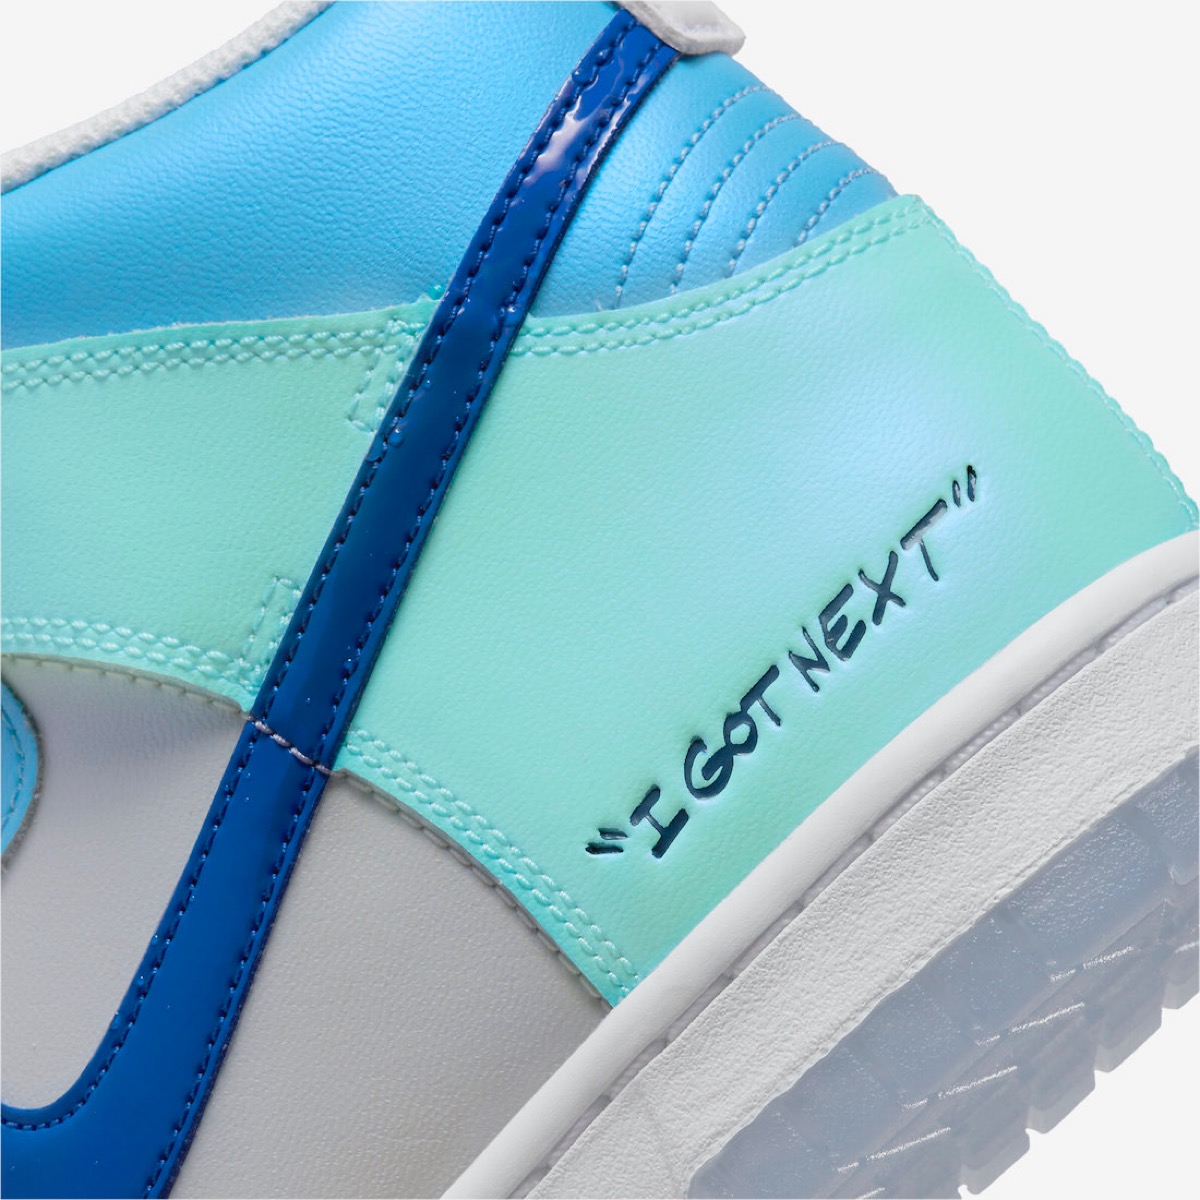 Nike Dunk High “I Got Next”が7月6日より発売予定 | UP TO DATE